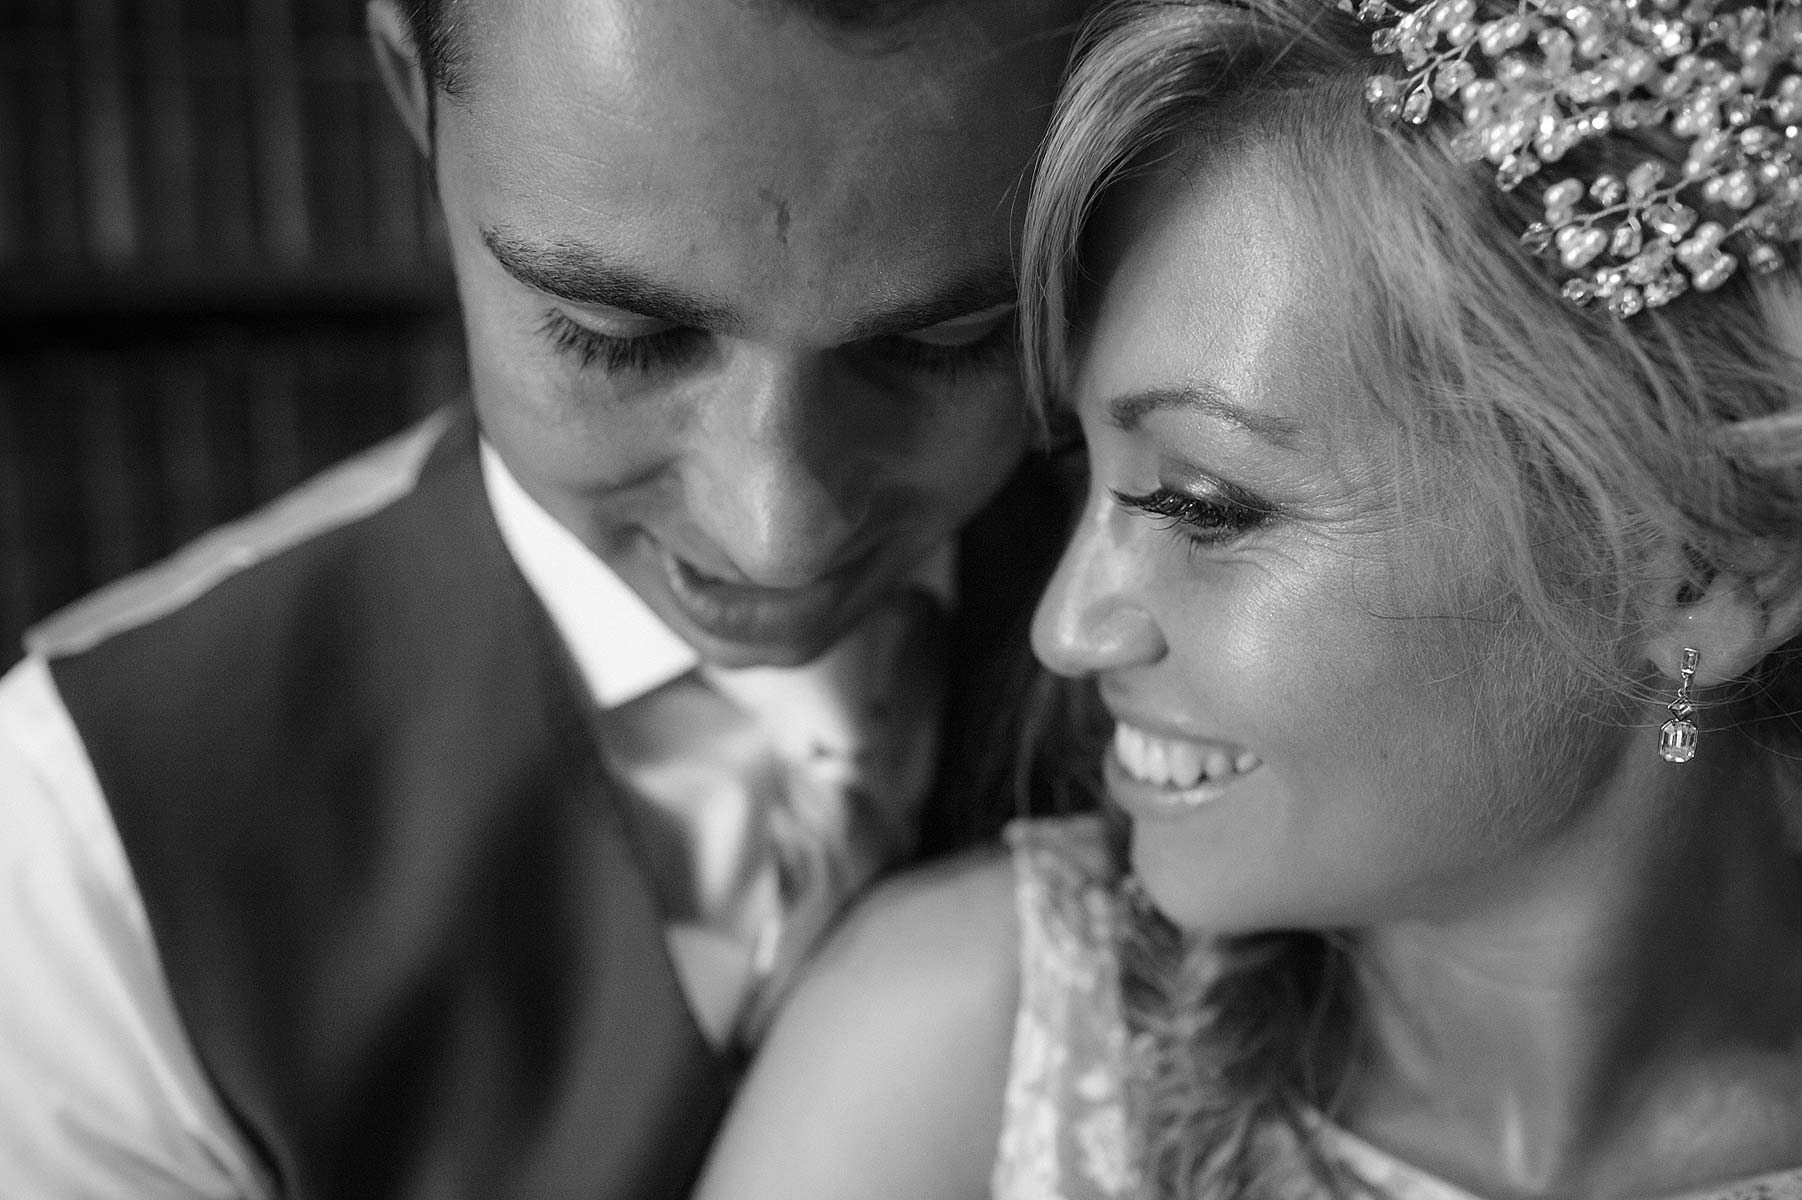 Intimate unobtrusive portraits of Bride and Groom at Weston Park in Staffordshire by Professional Wedding Photographer Stuart James